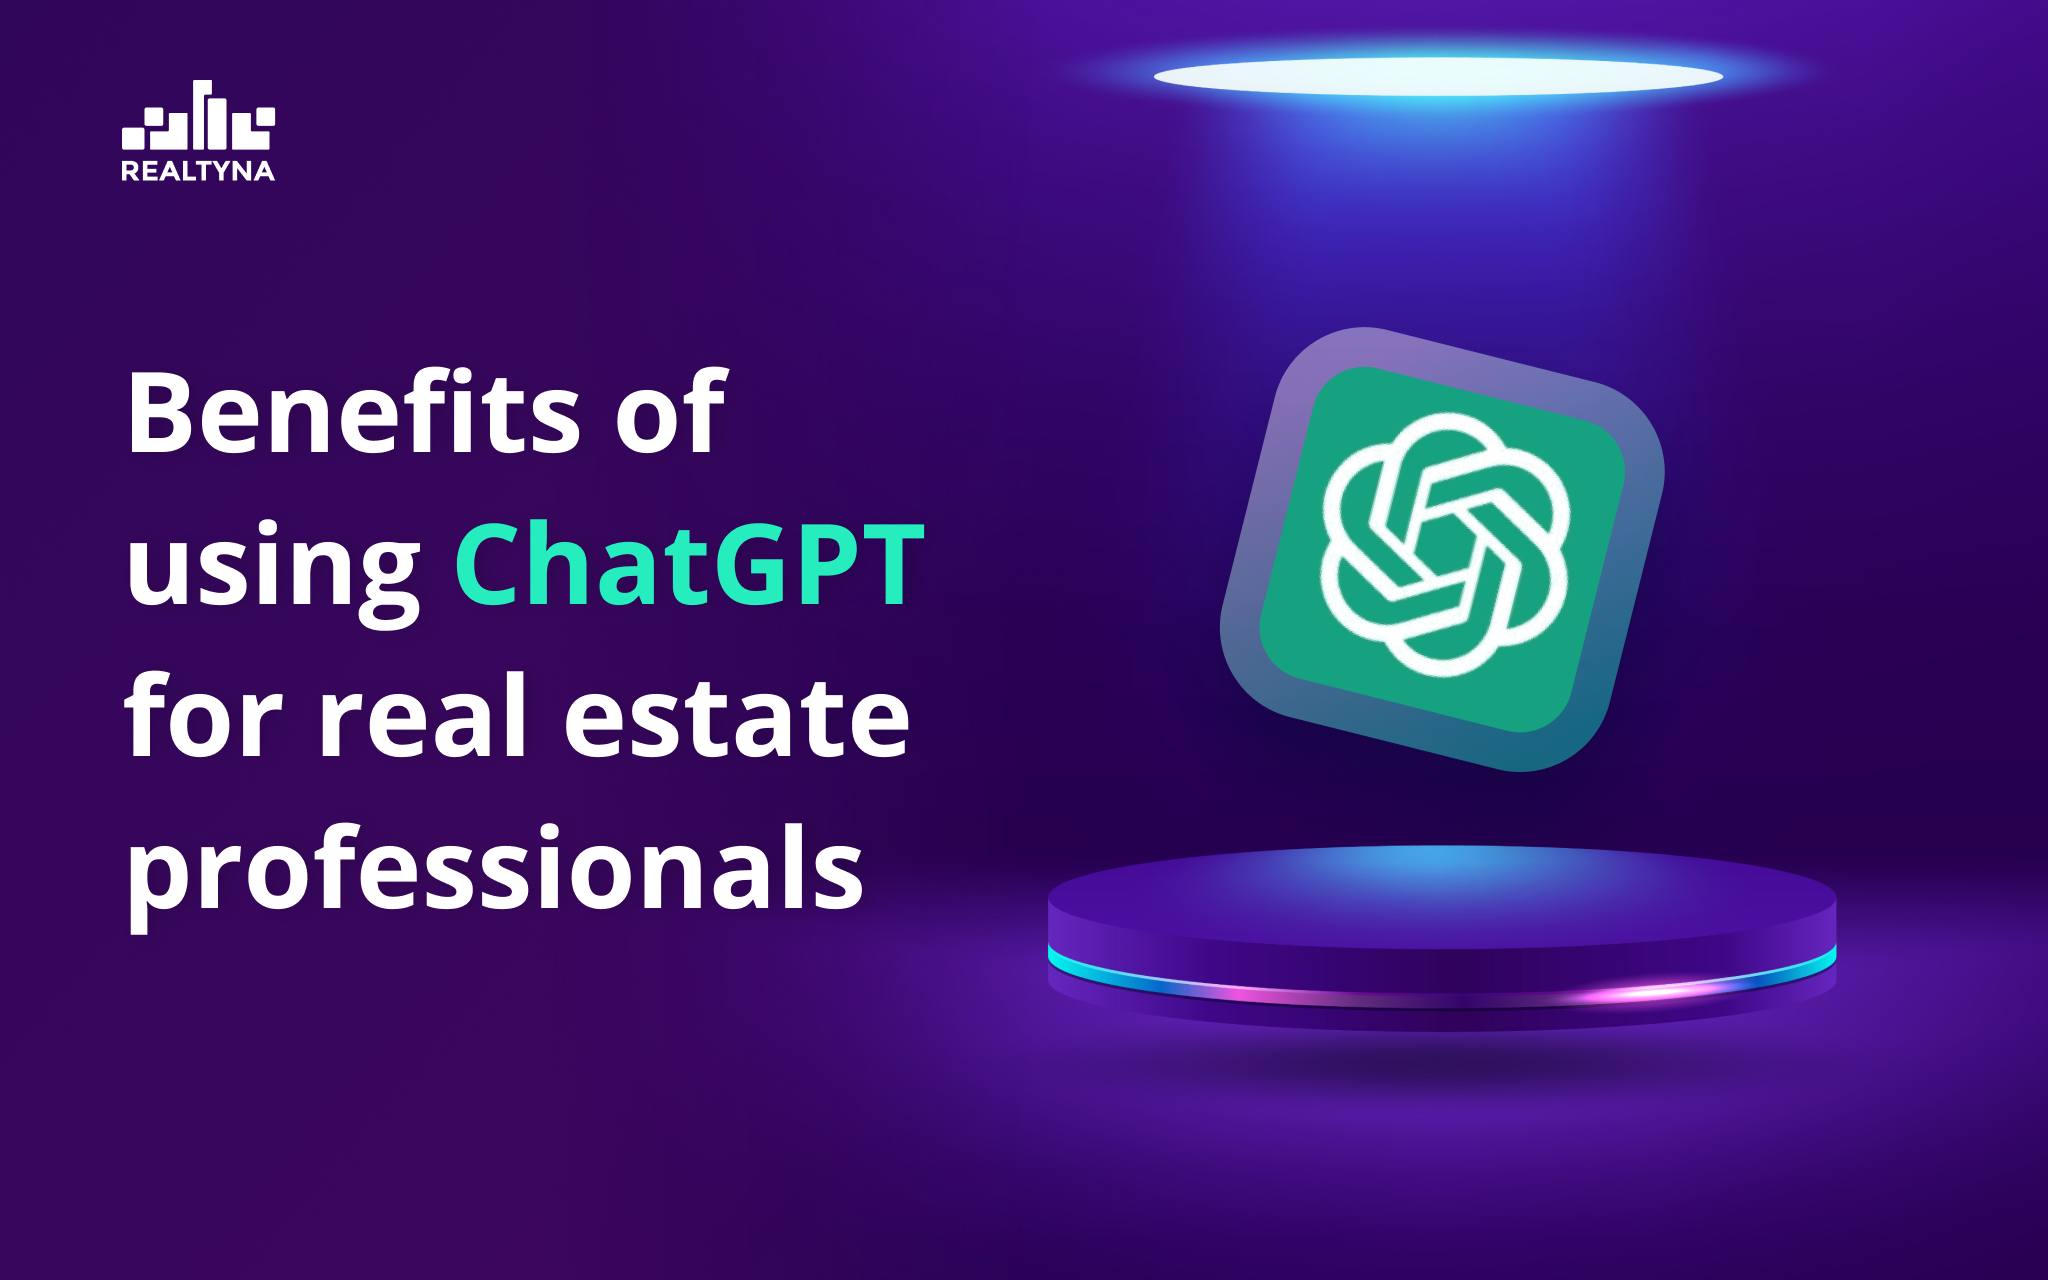 Benefits of using ChatGPT for real estate professionals